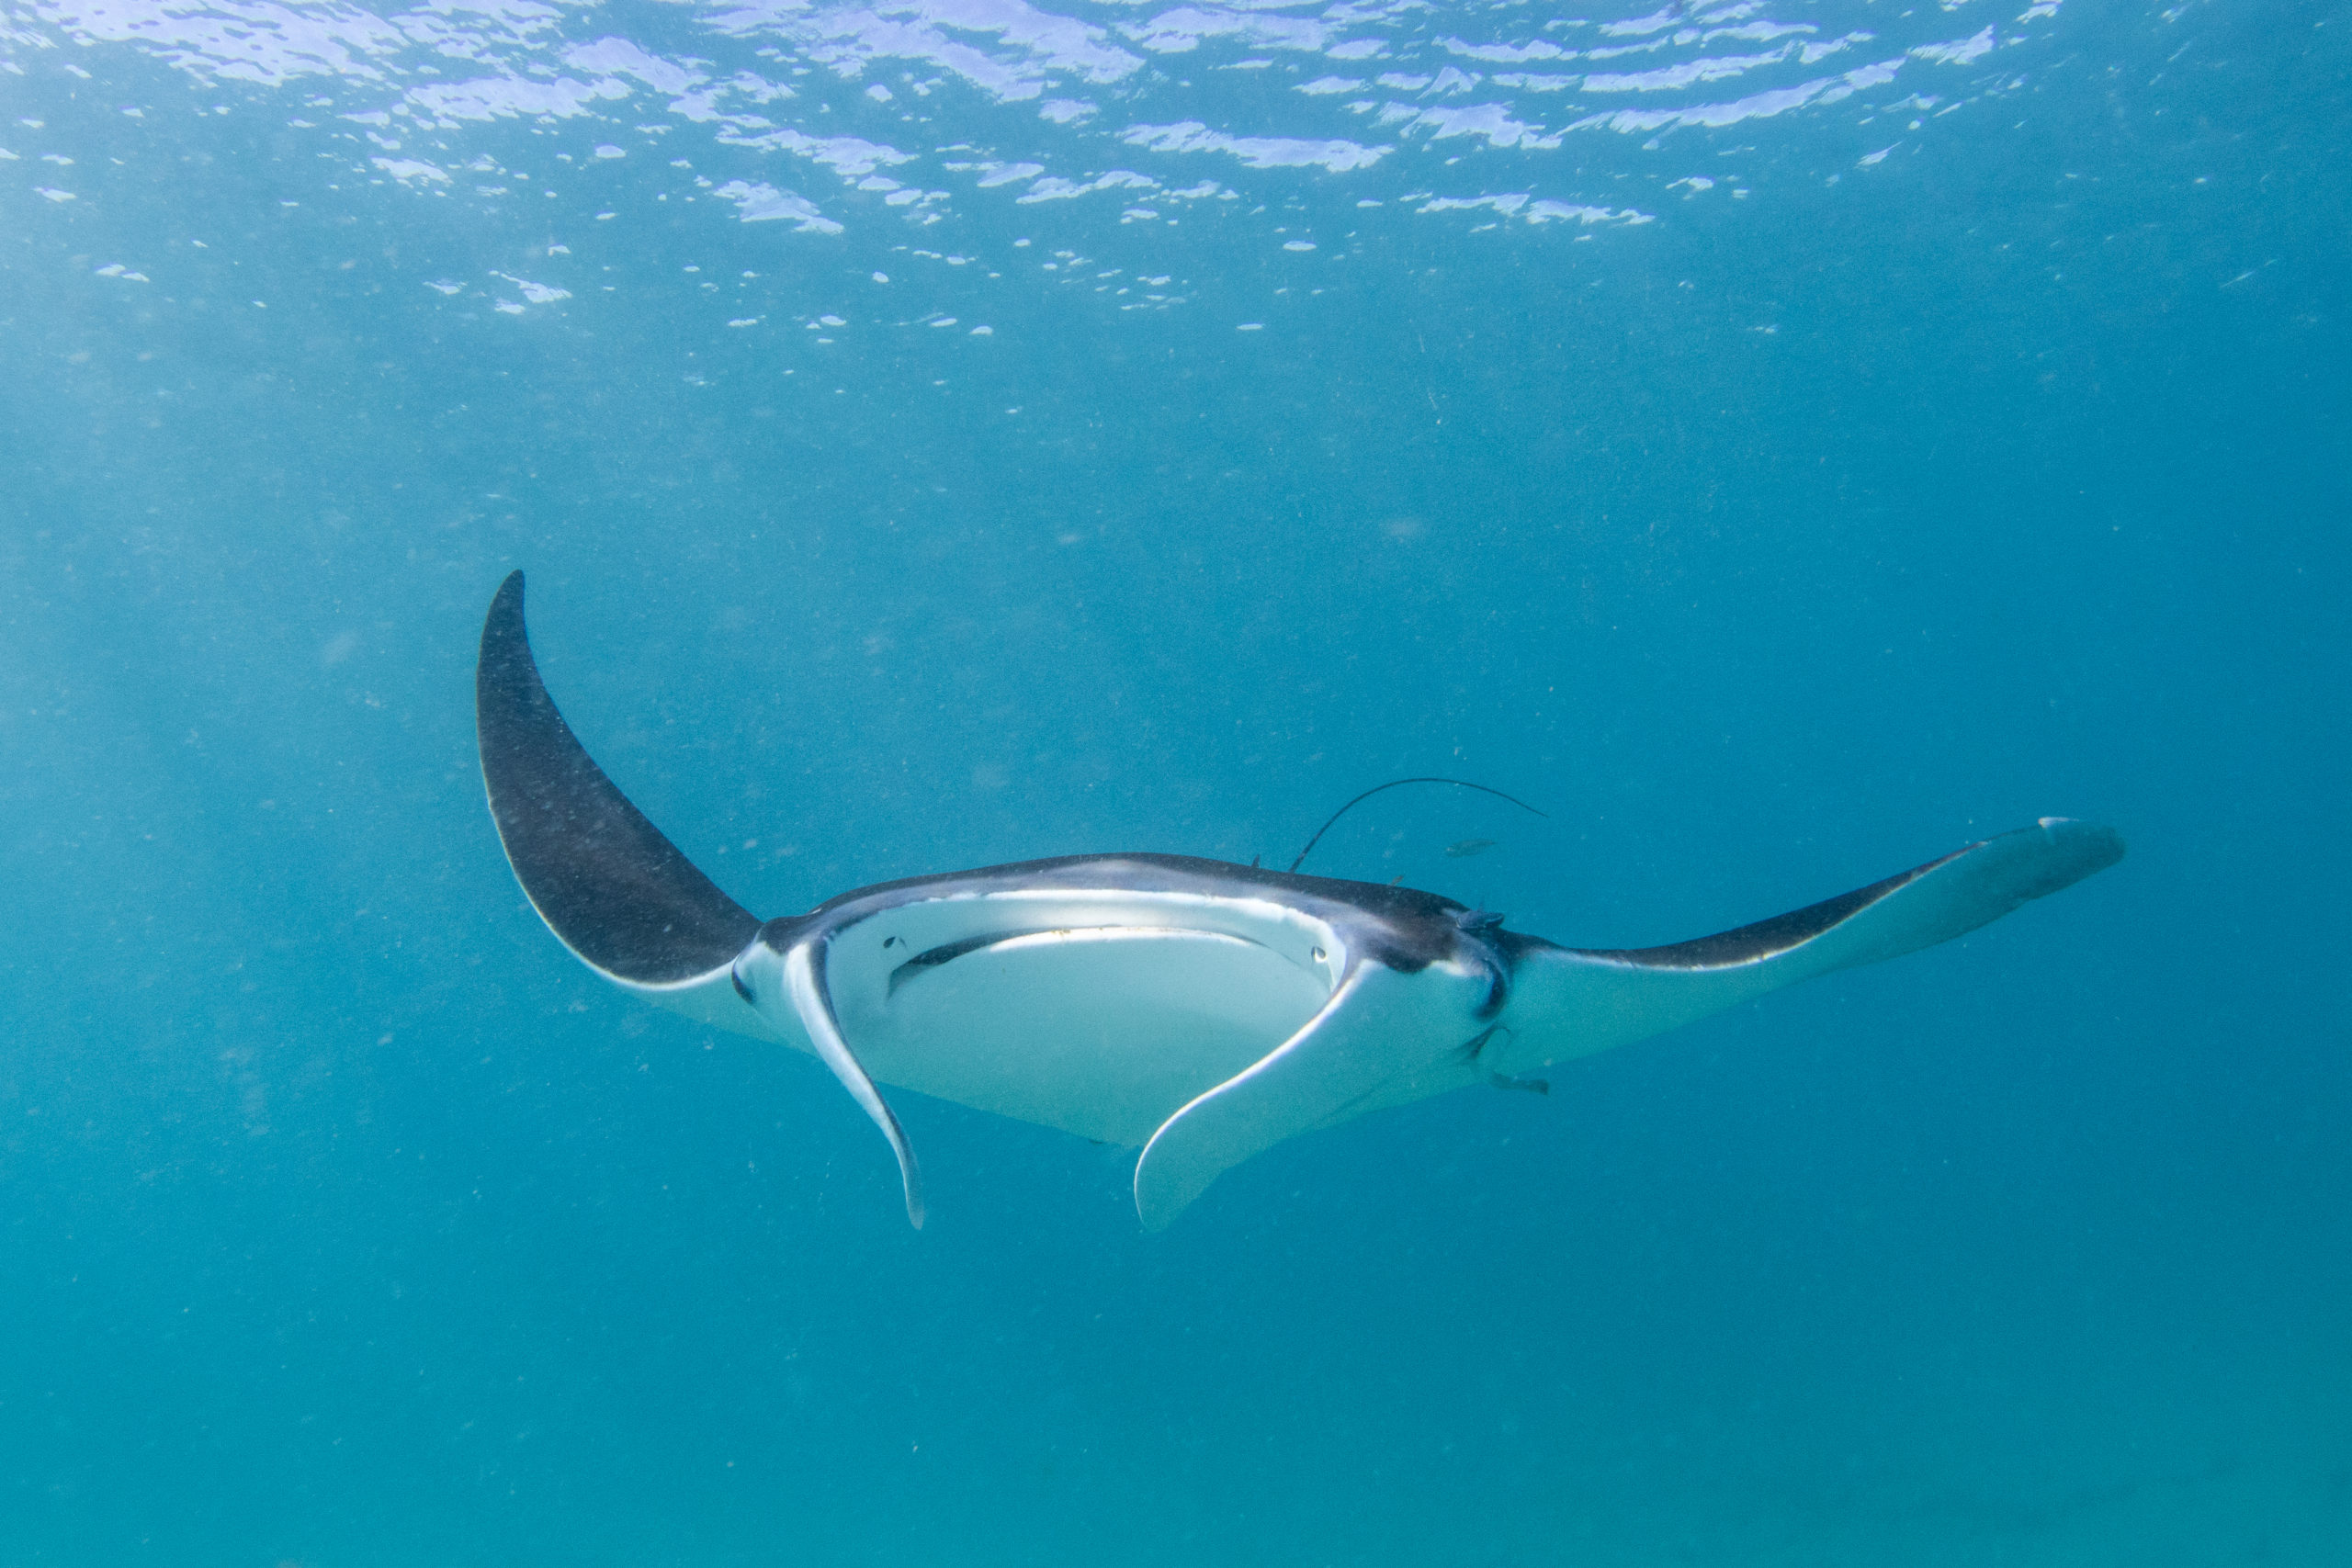 Skye the giant manta ray during Expedition 41 onboard R/V ANGARI. PC: Bryant Turffs.